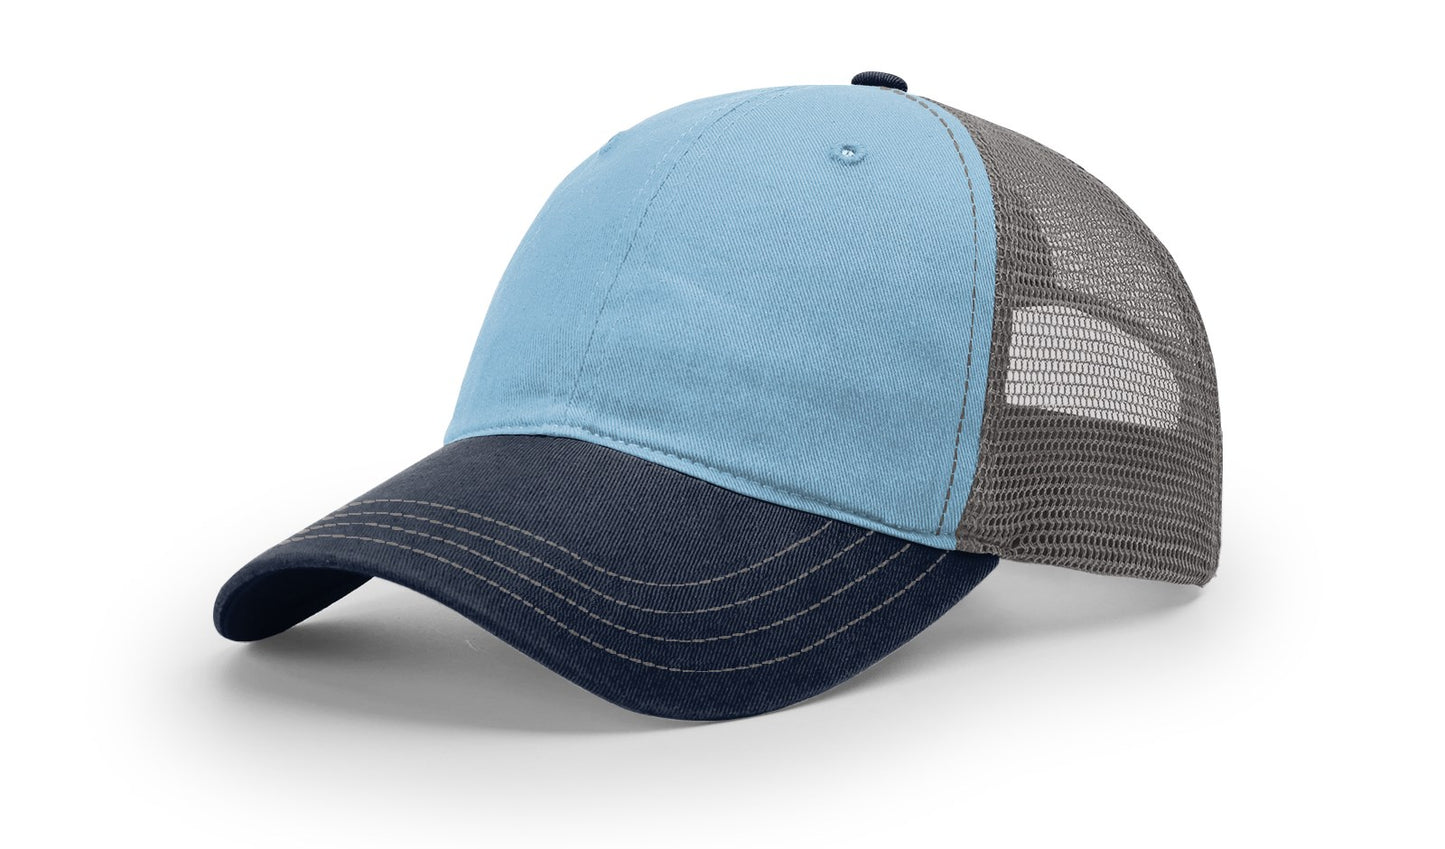 COLUMBIA BLUE/CHARCOAL/NAVY